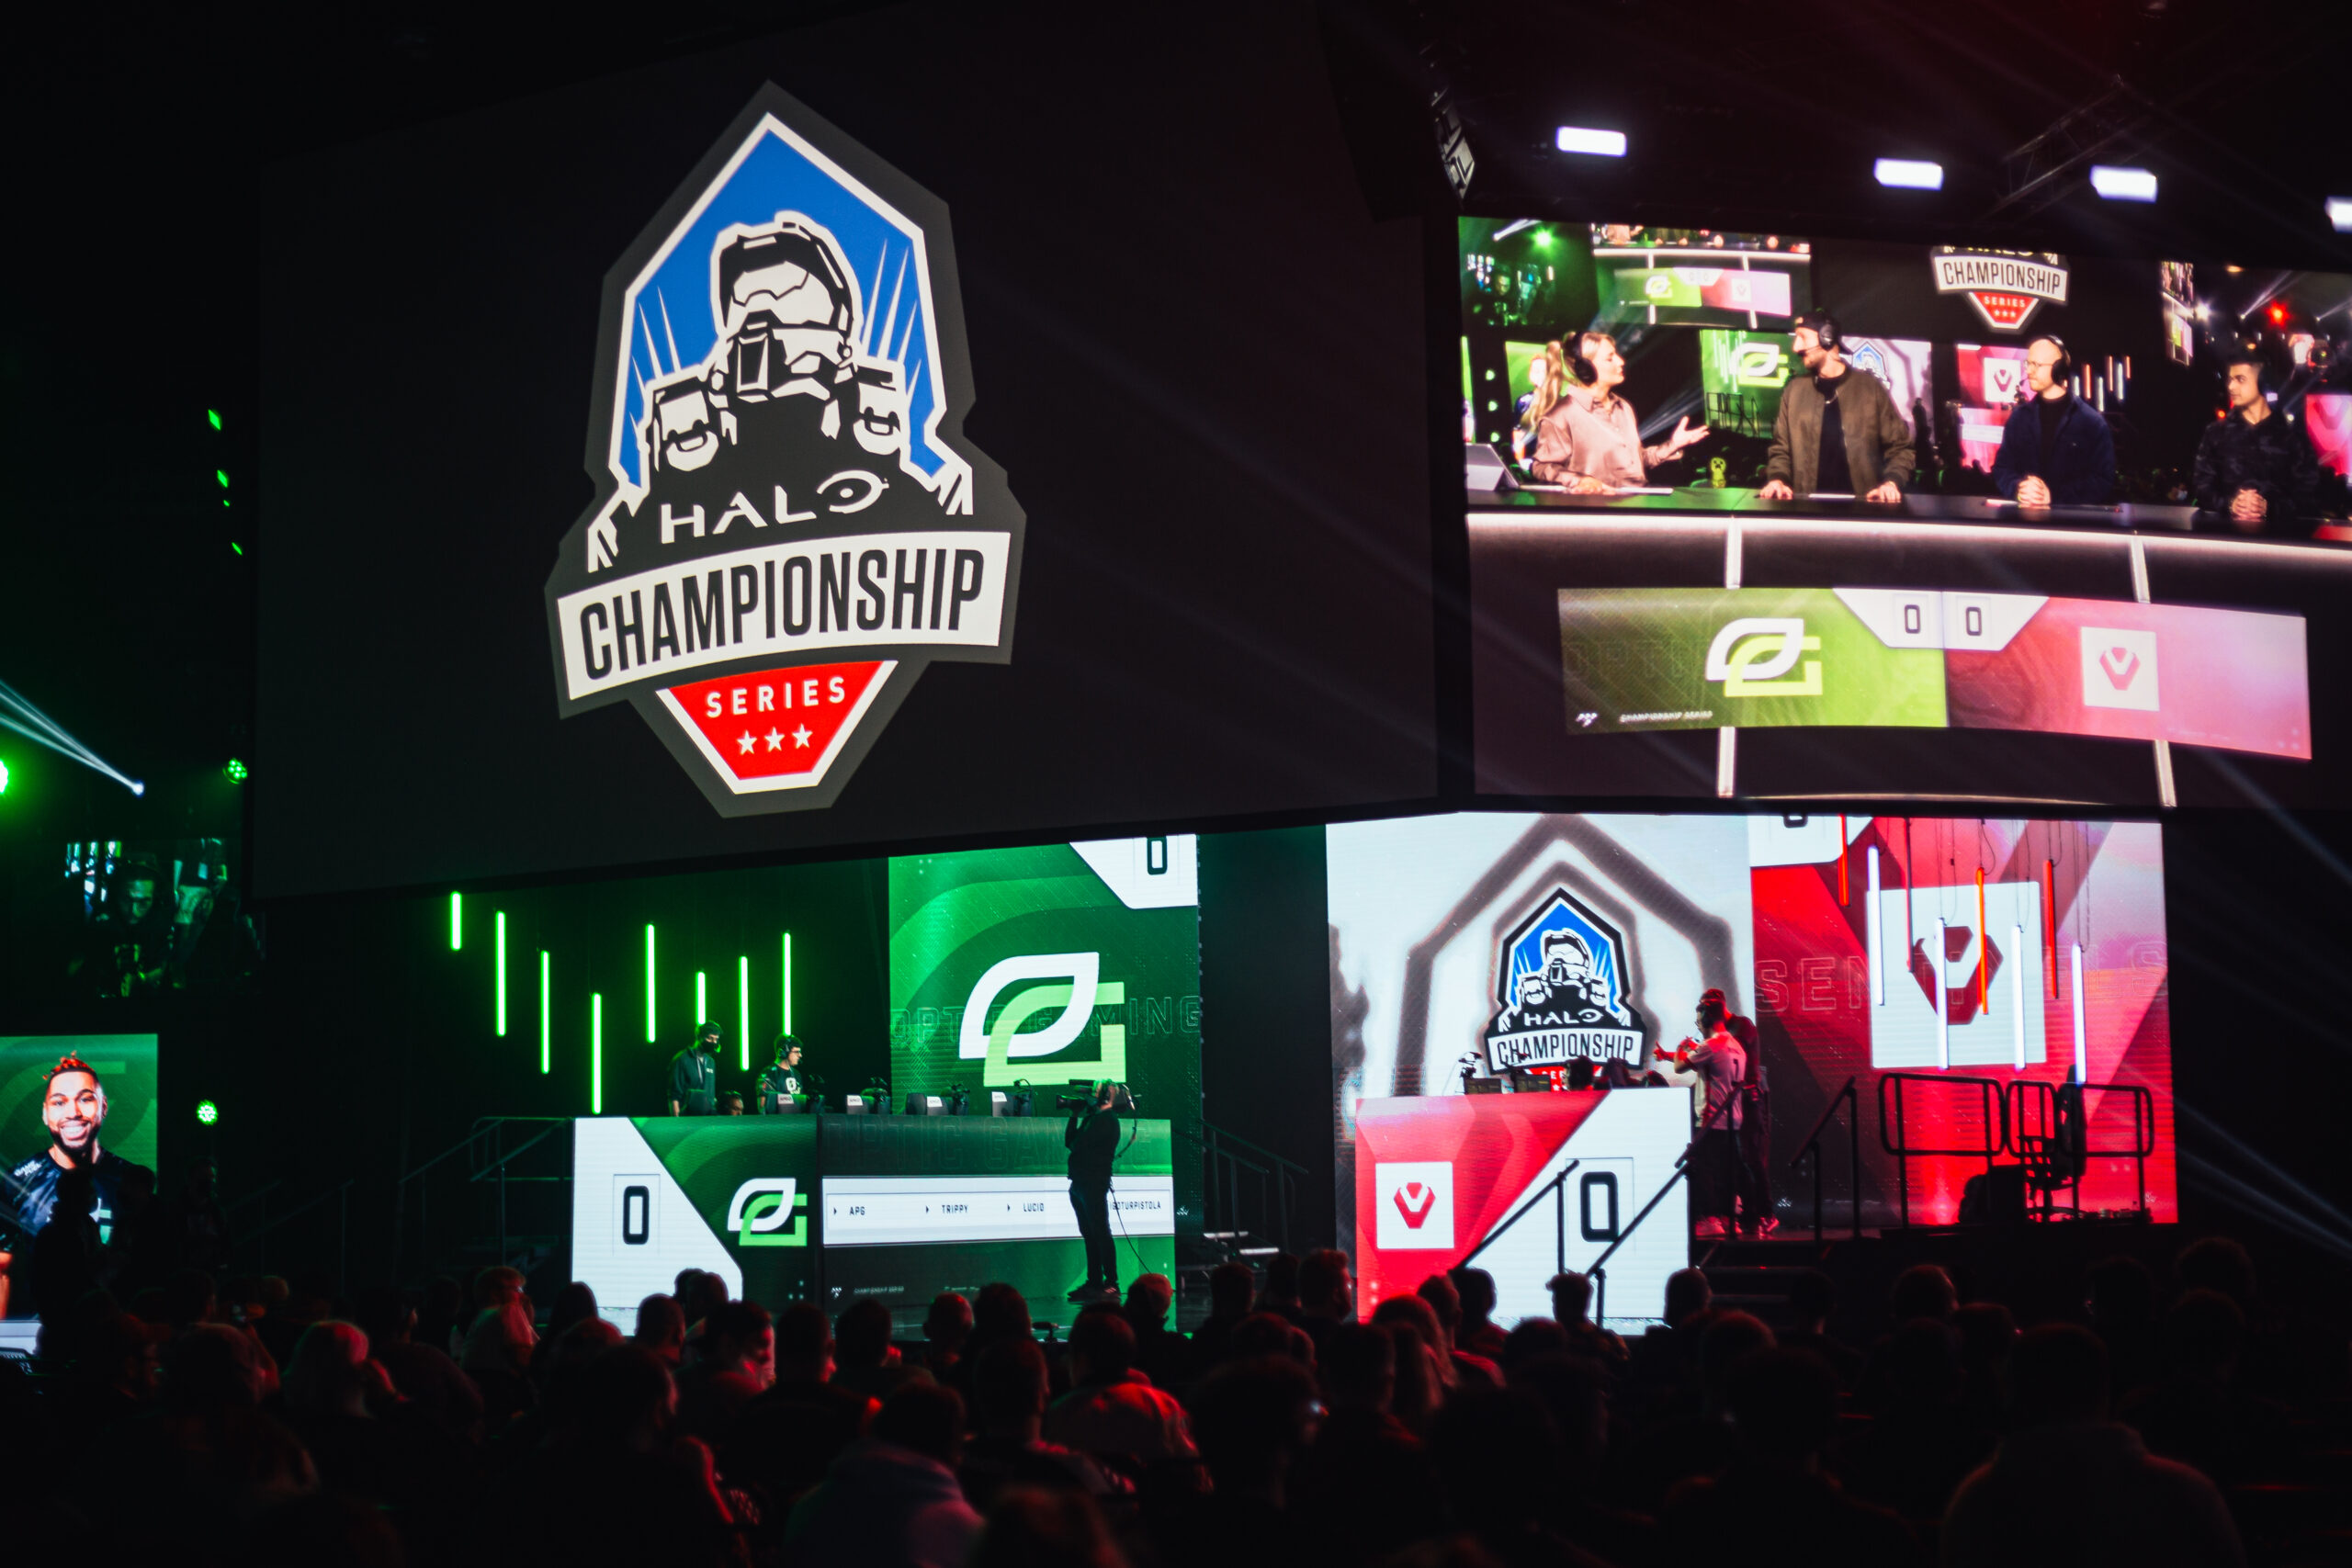 optic gaming vs sentinels on the mainstage with crowd in the foreground